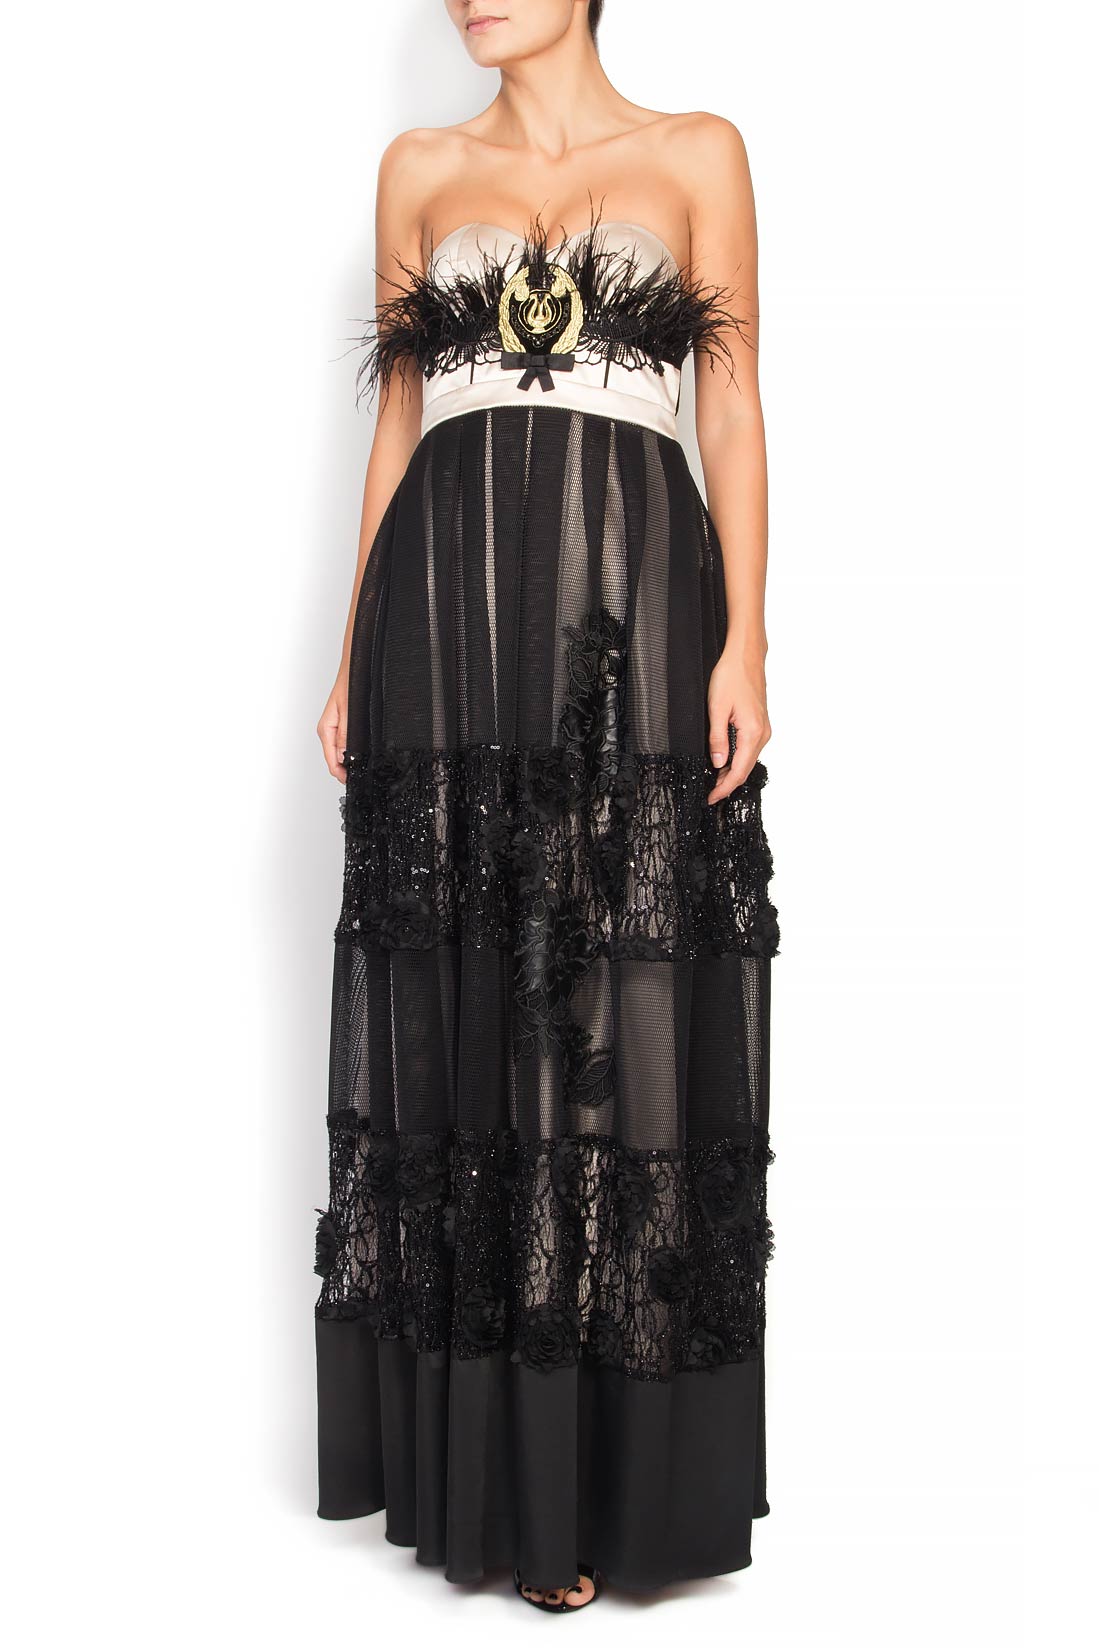 Silk and lace maxi dress with feathers Elena Perseil image 0